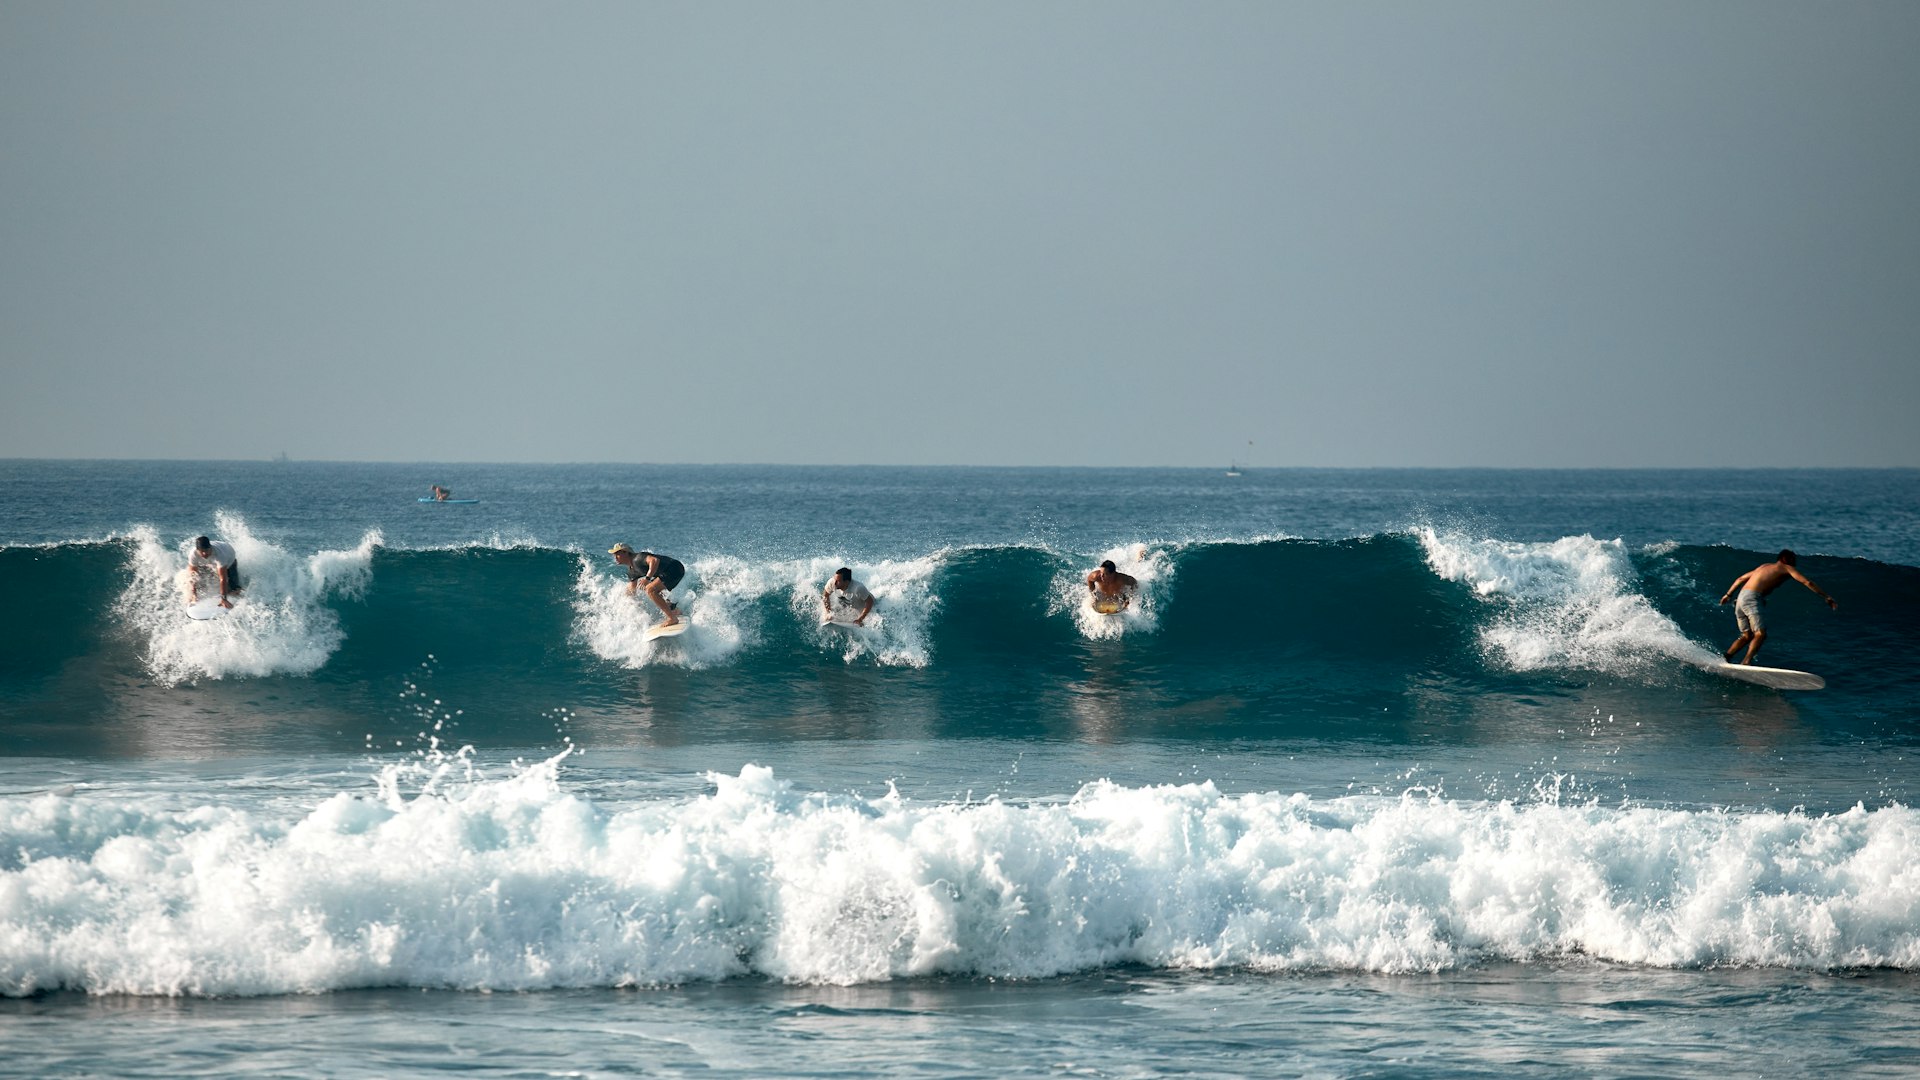 Five surfers in a row catch a wave in a tropical destination